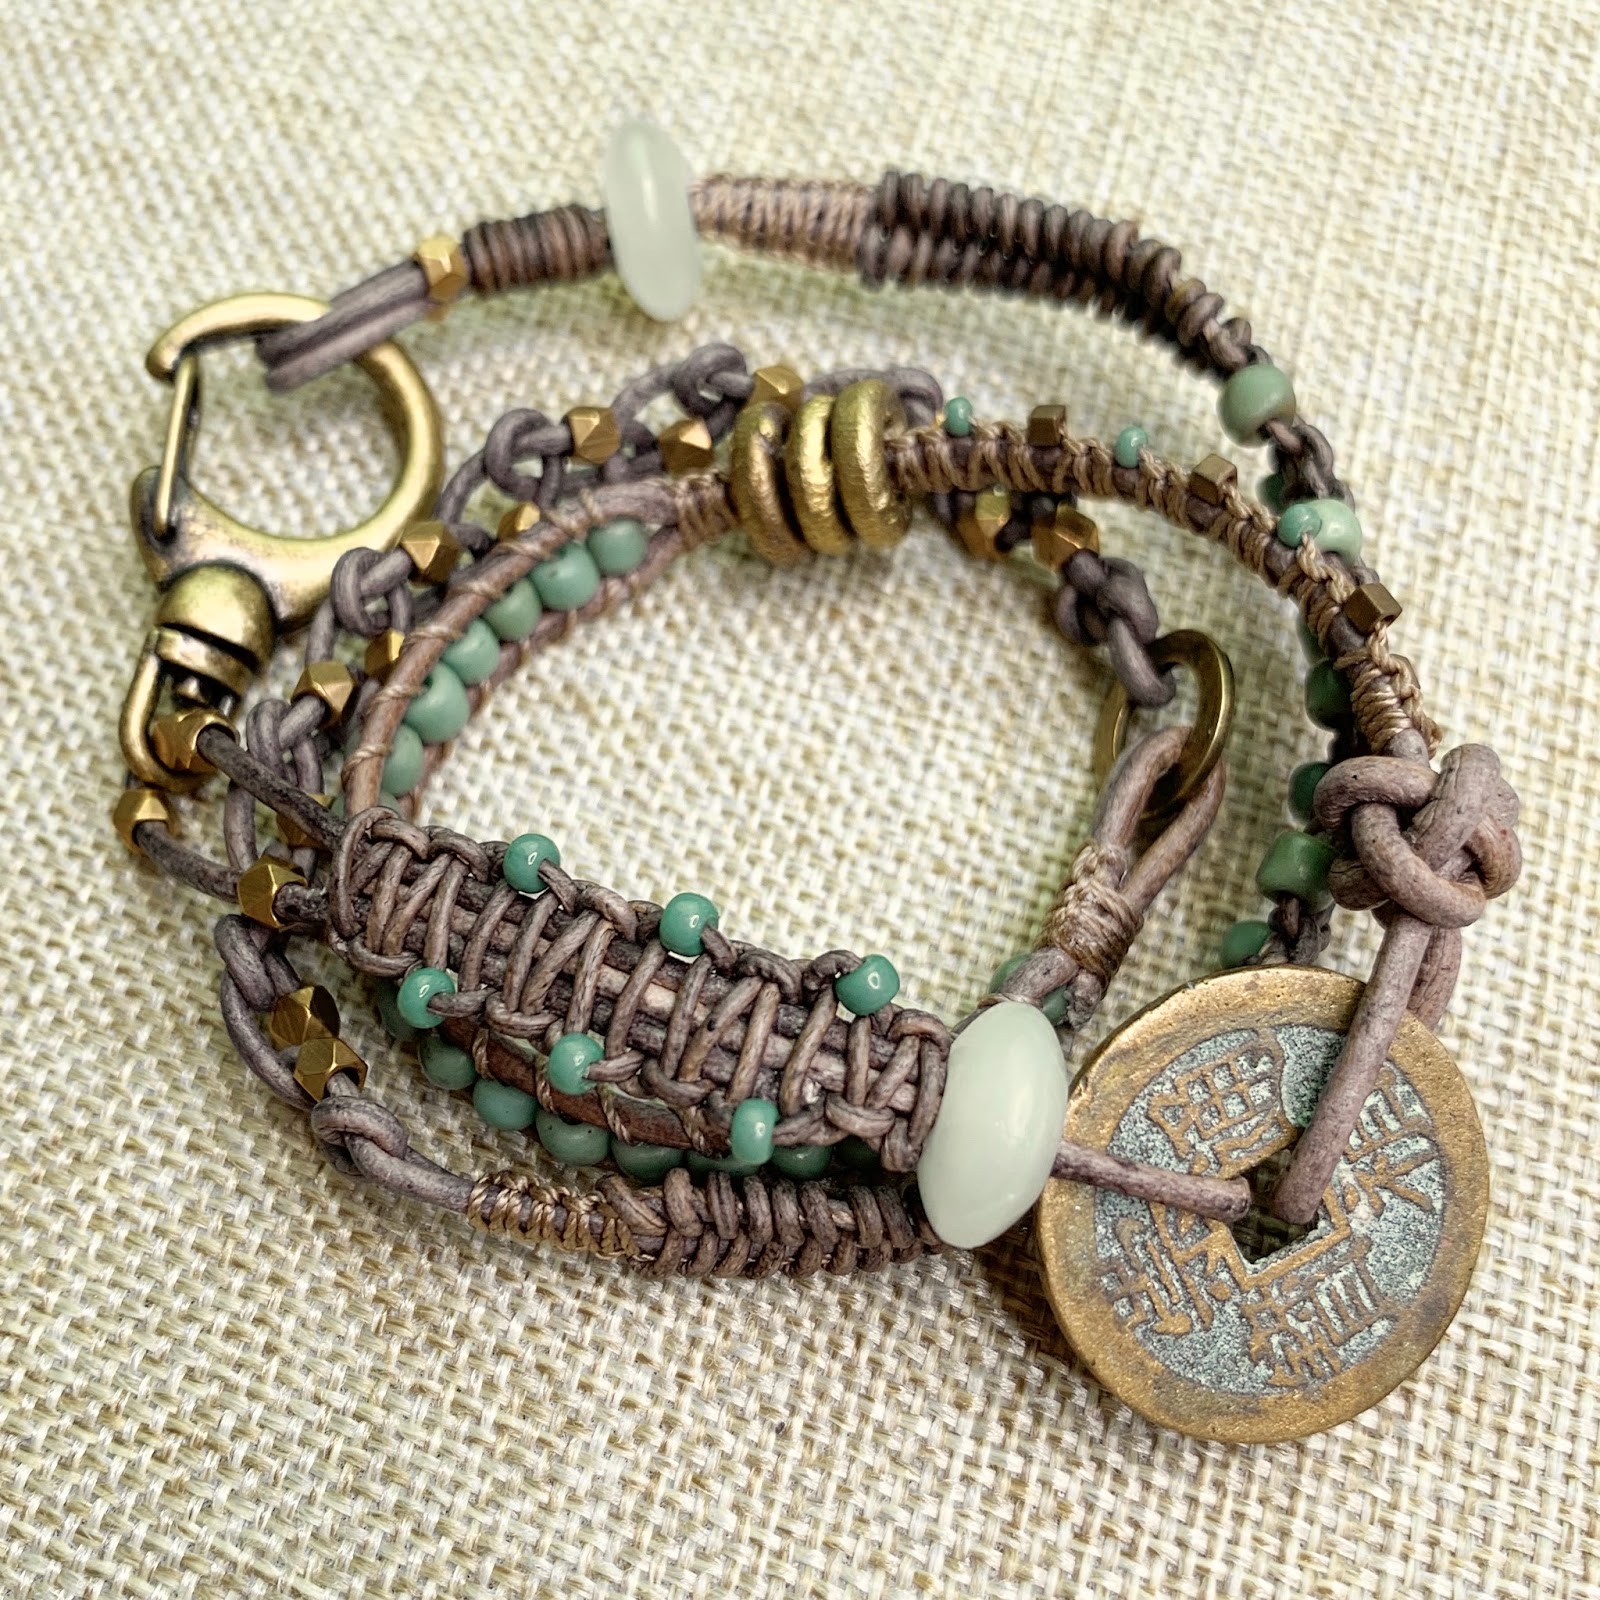 The Bead Table: Kate's Creative Connection: Steadfast, an epic wrap ...